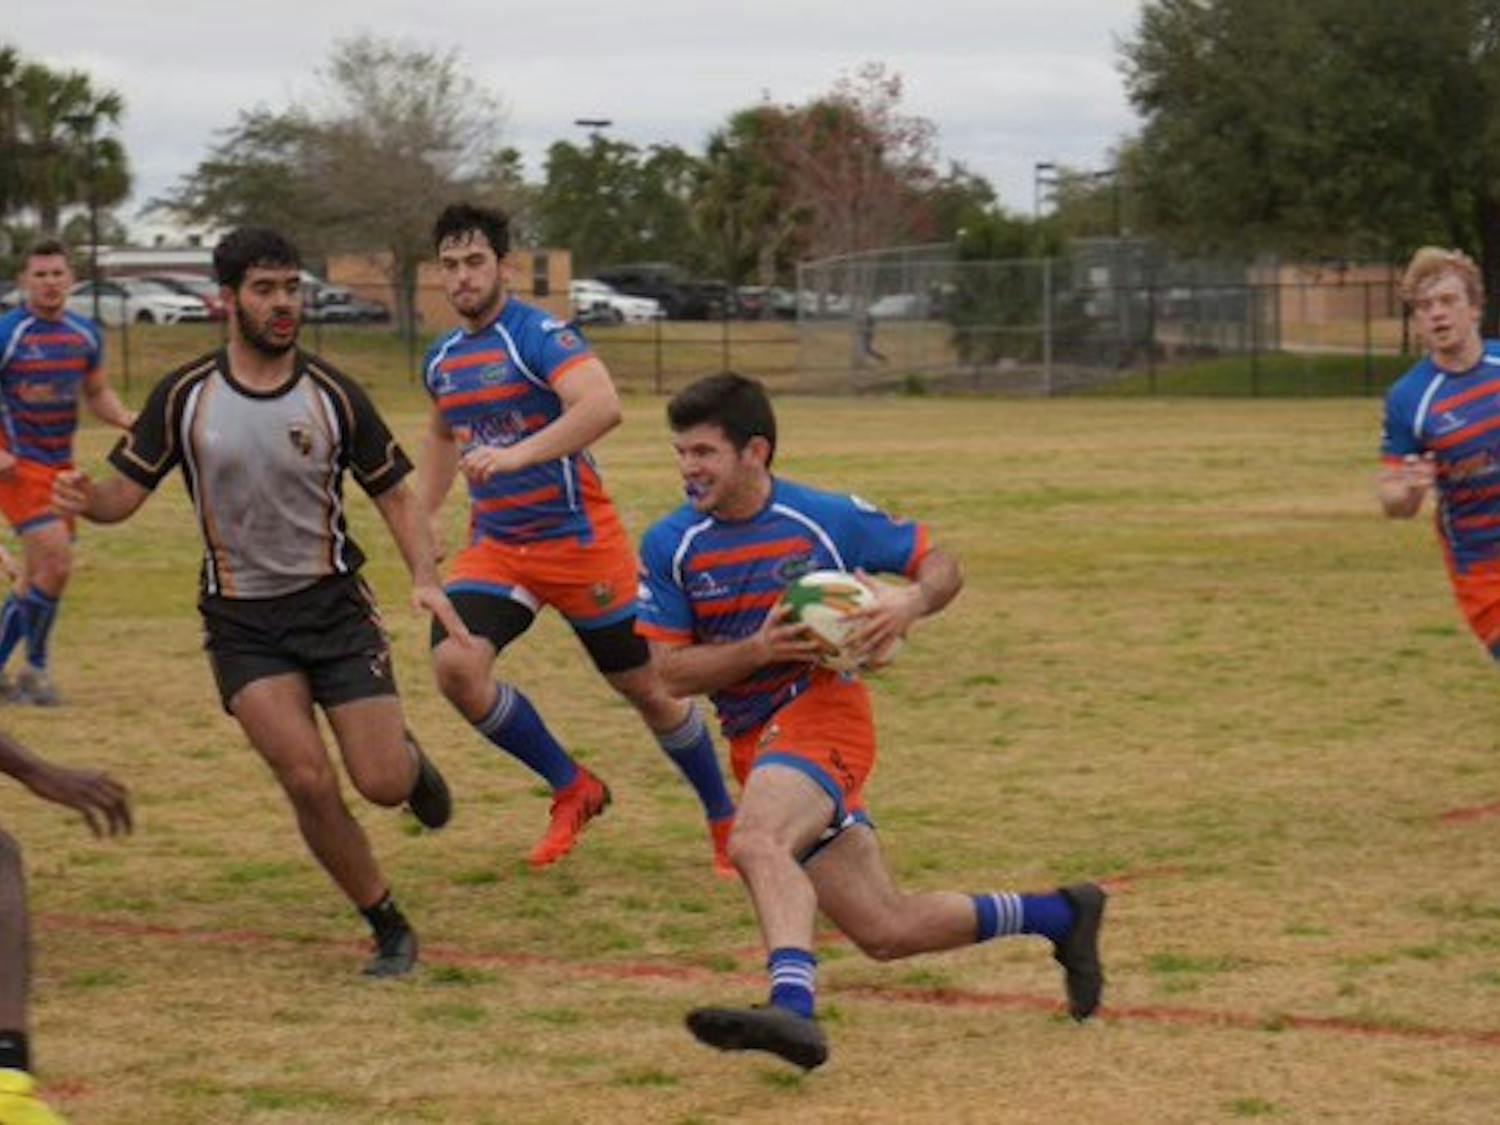 The Florida rugby club will compete in the USA Rugby 7s Collegiate Championships from May 14-15 in Atlanta, Georgia.